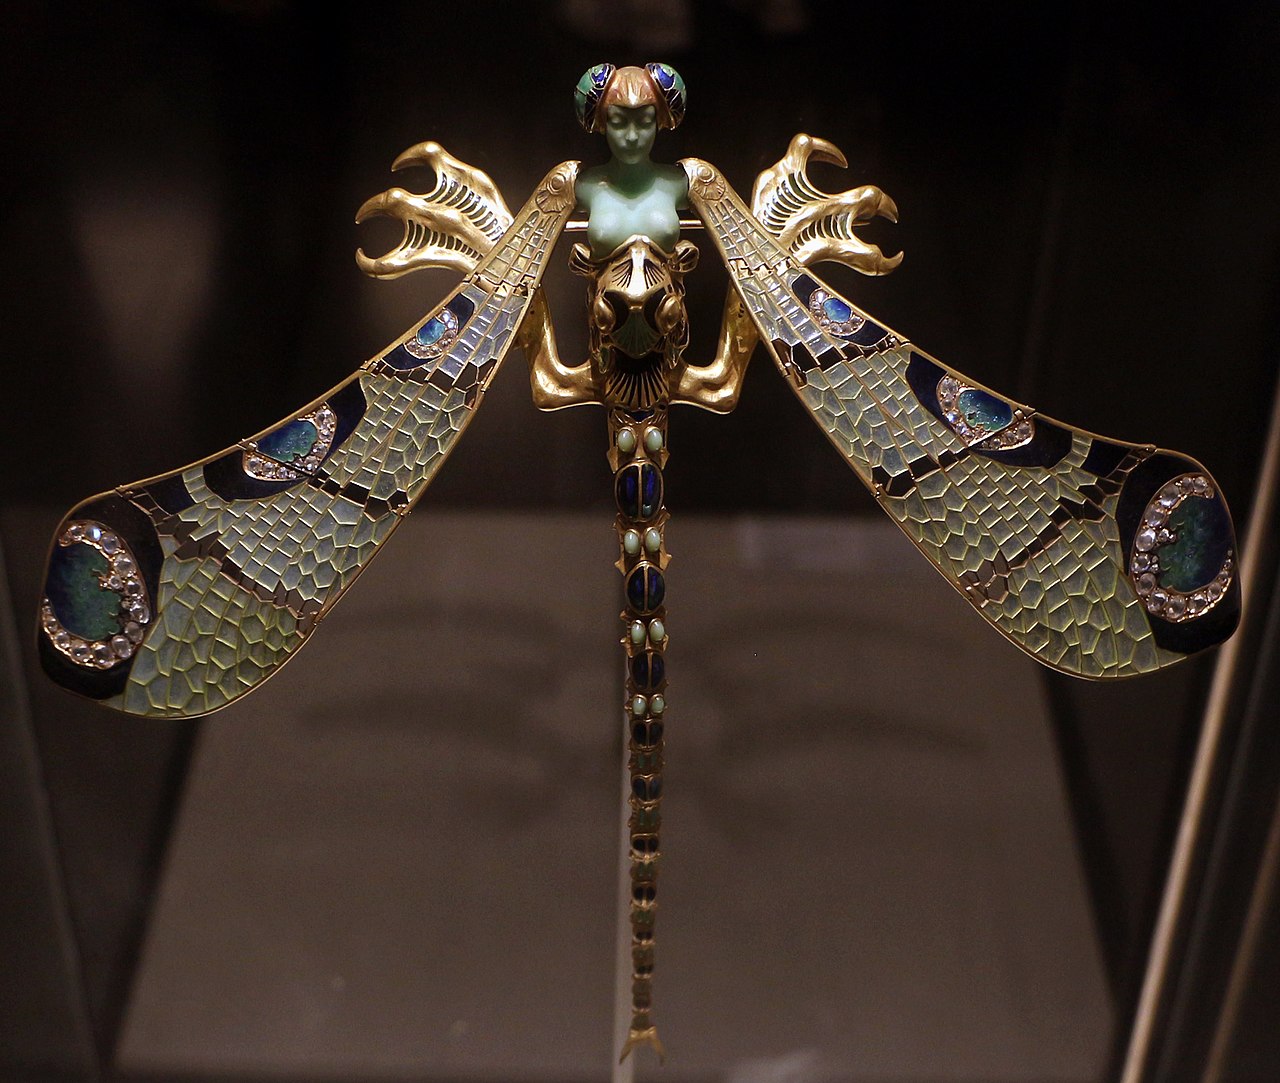 RENE LALIQUE: THE MASTER OF ART NOUVEAU JEWELRY AND GLASS ART